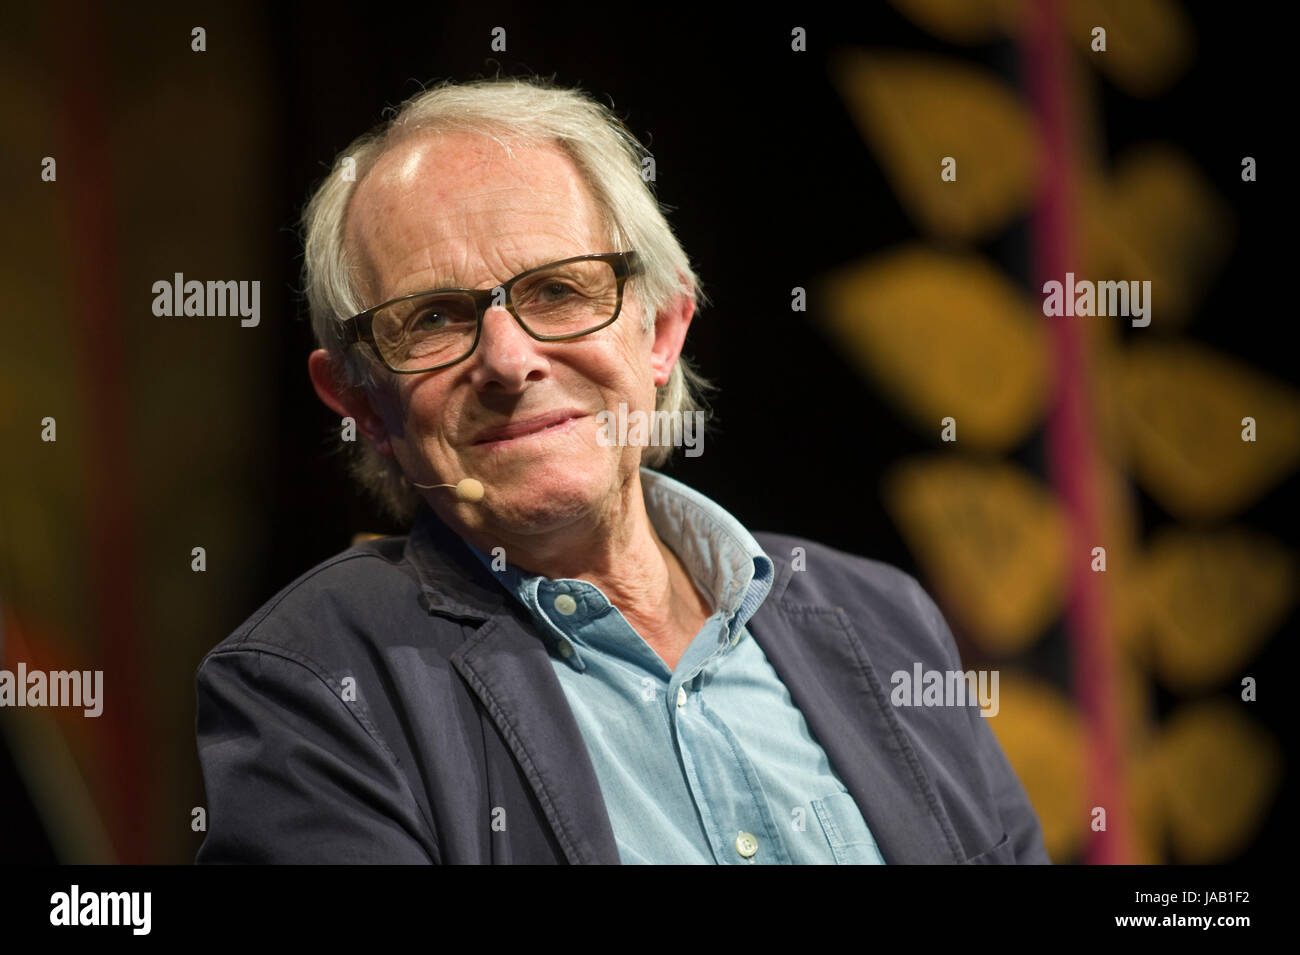 Ken Loach film director speaking about culture, society and his style of social realism on stage at Hay Festival of Literature and the Arts 2017 Hay-on-Wye Powys Wales UK Stock Photo